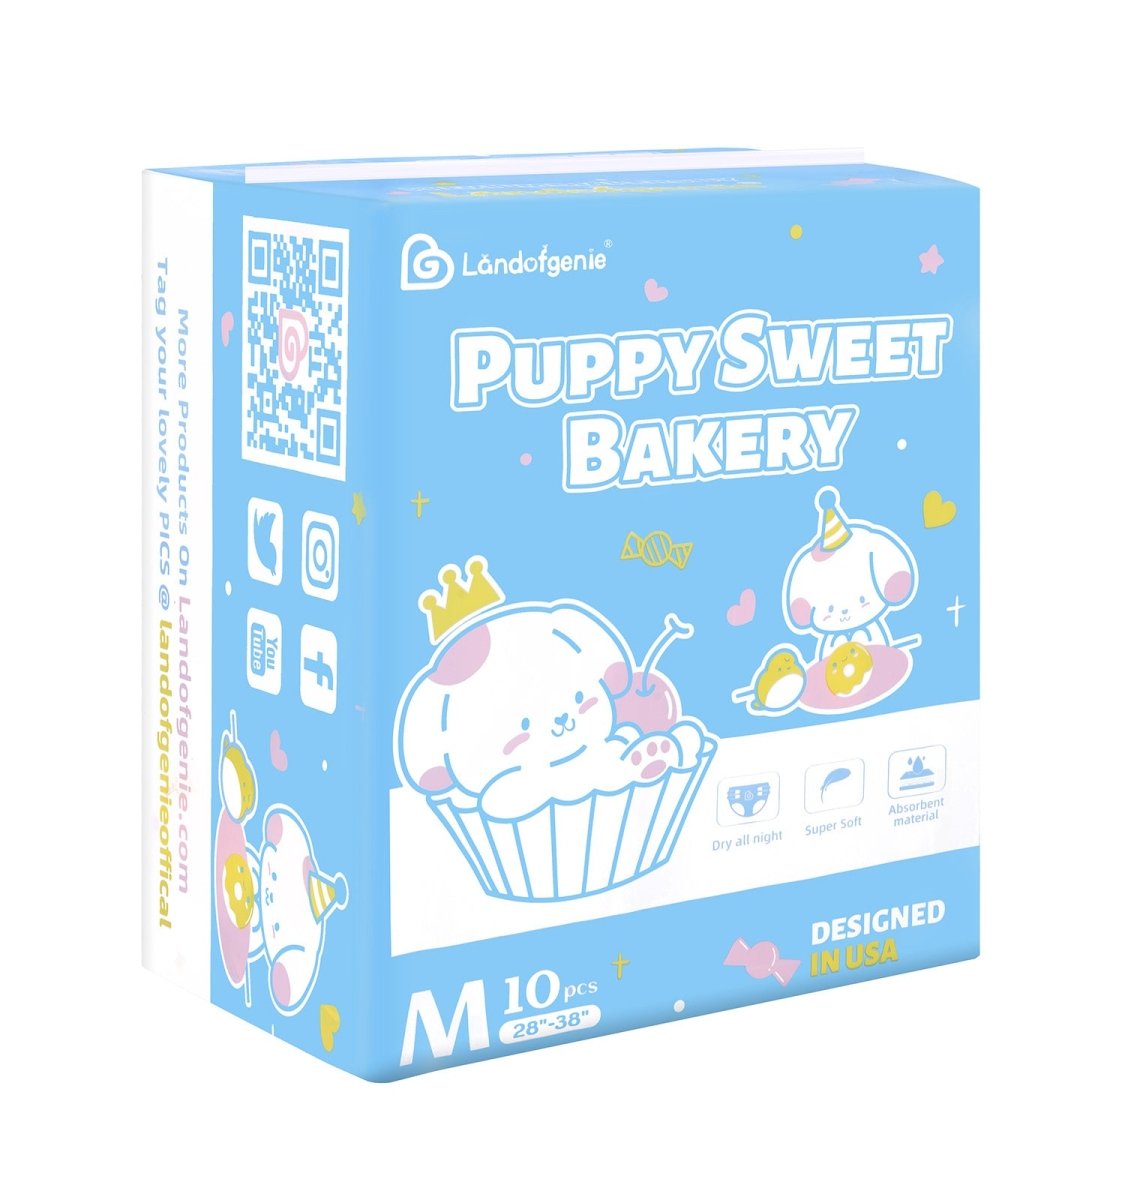 Landofgenie Adult ABDL Diapers Overnight Adult Diapers With 10 Pieces - Puppy Sweet Bakery - landofgenie